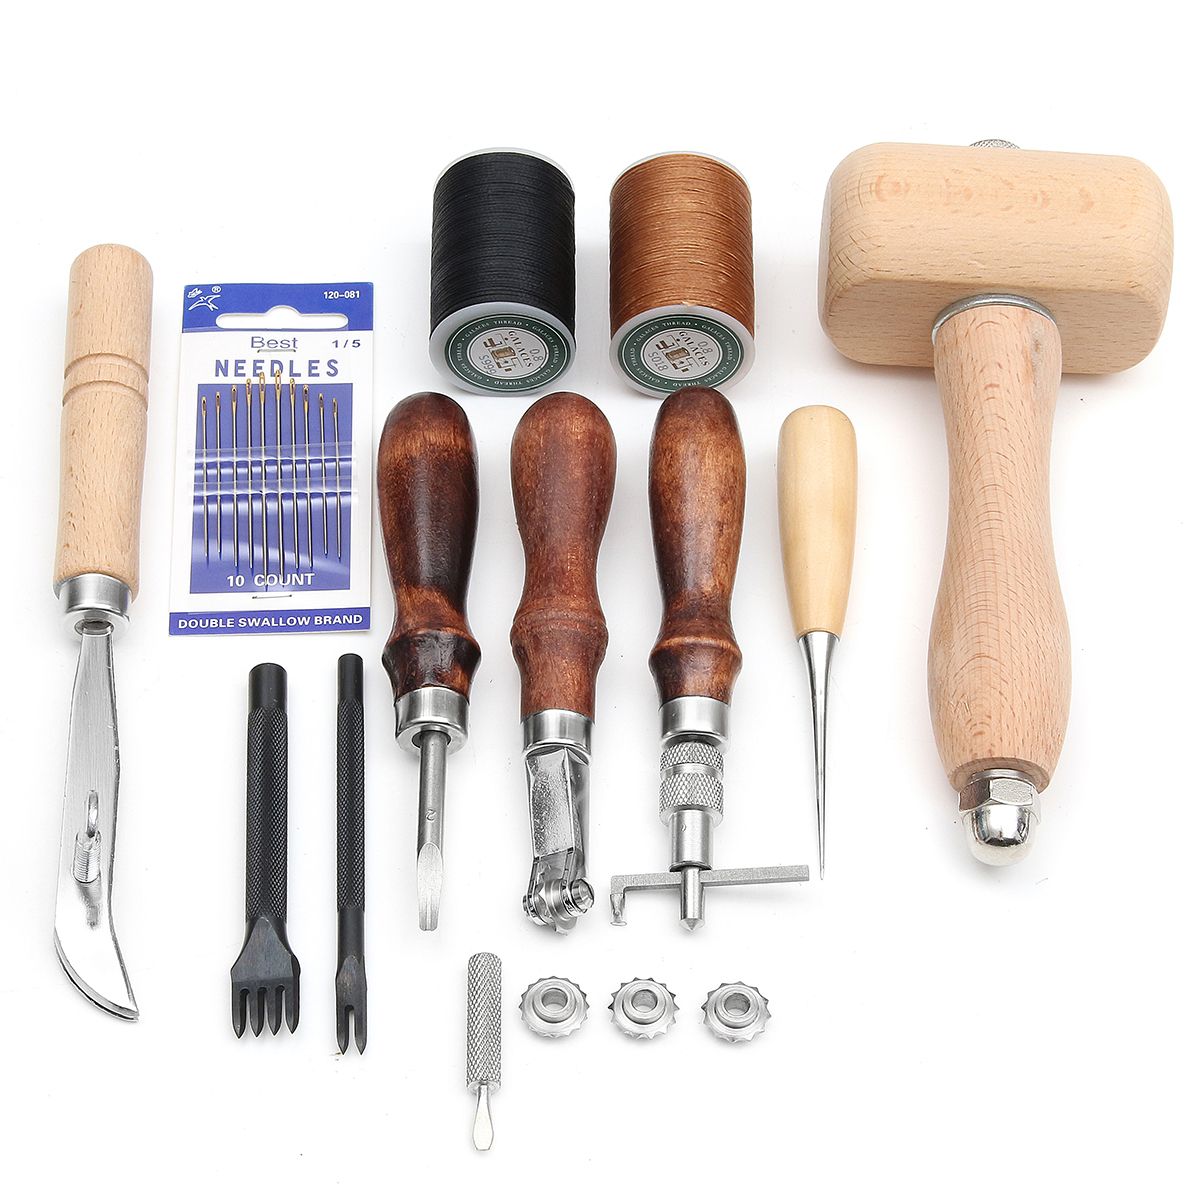 11PCS-Leather-Carving-Punch-Cutter-Hammer-Essential-Tools-Set-Manual-Craft-DIY-Leather-Carving-To-1289287